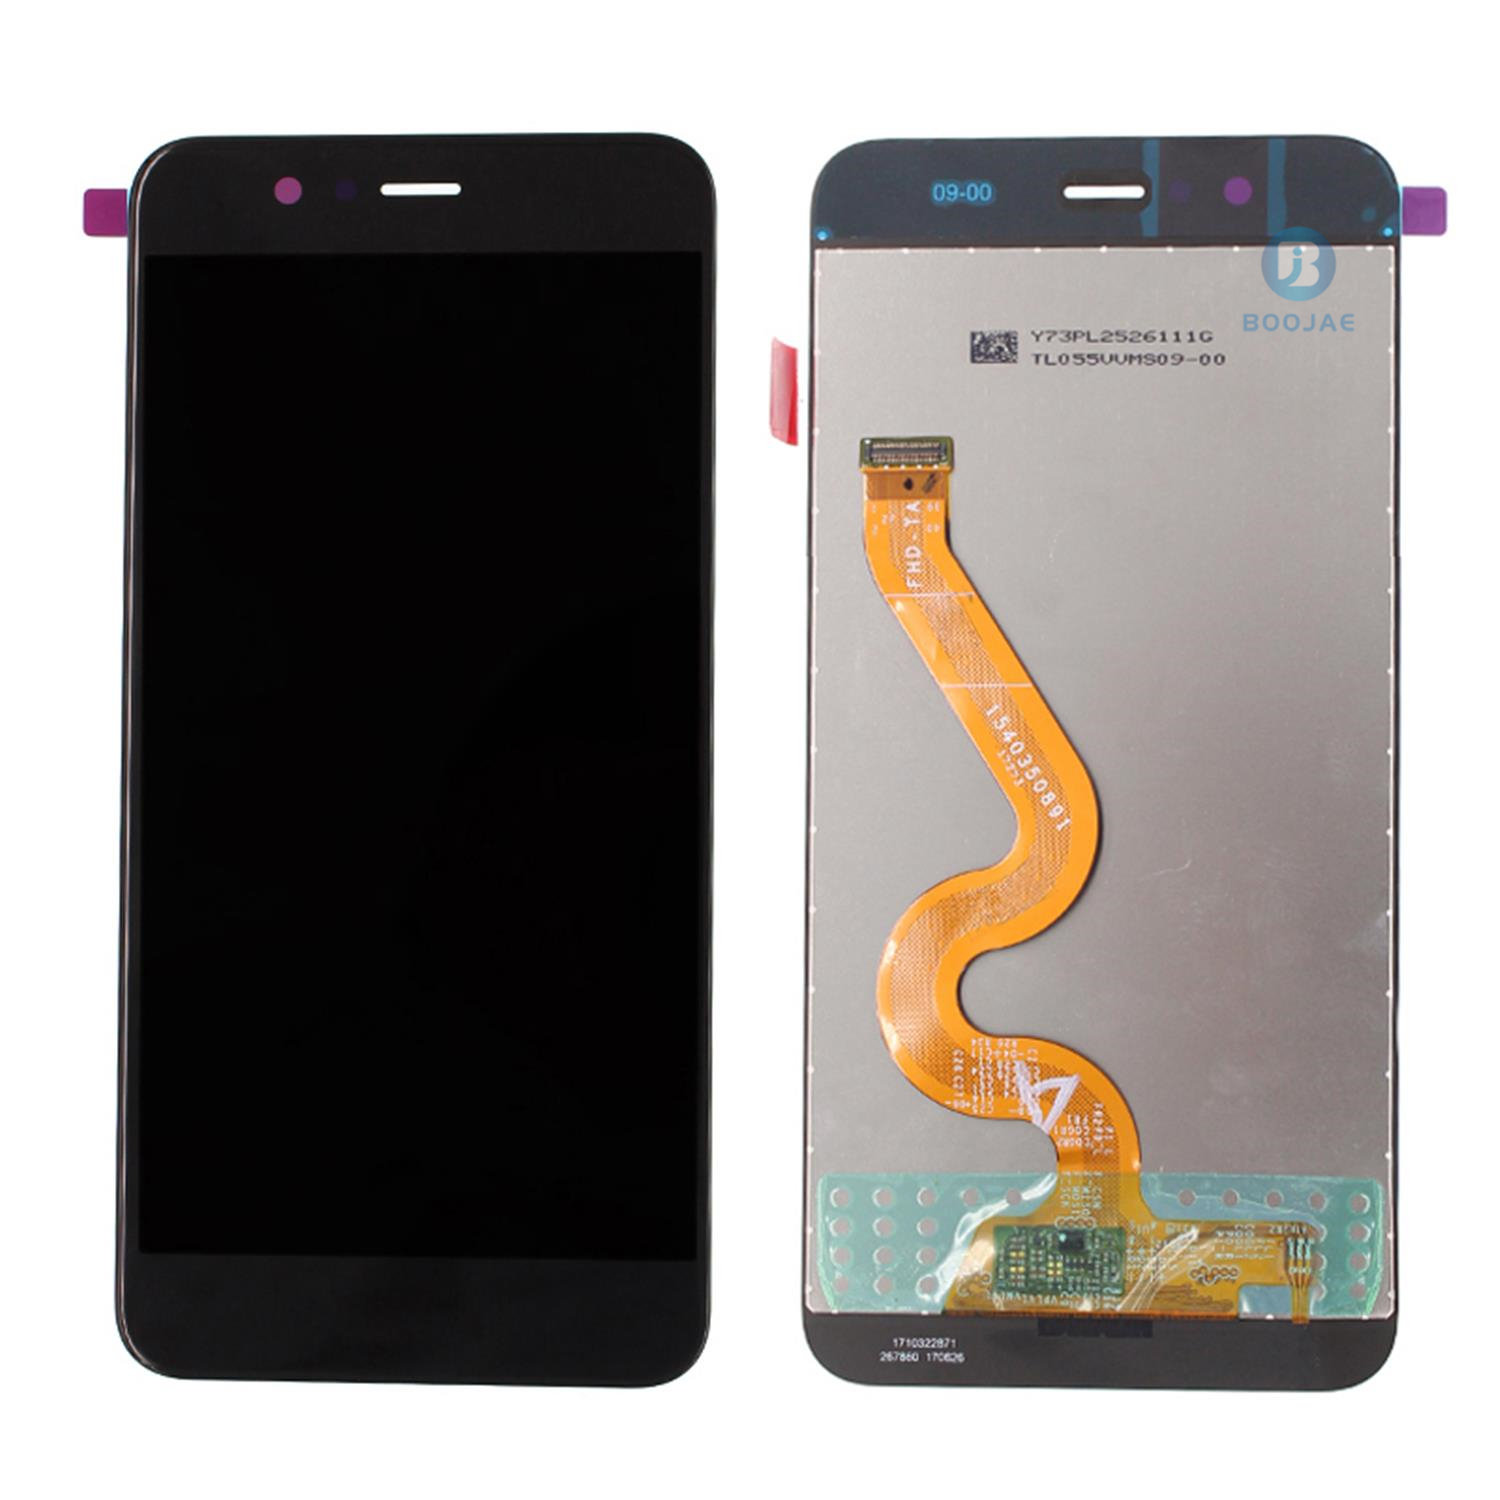 Huawei Nova 2 Plus Lcd Screen Display, Lcd Assembly Replacement